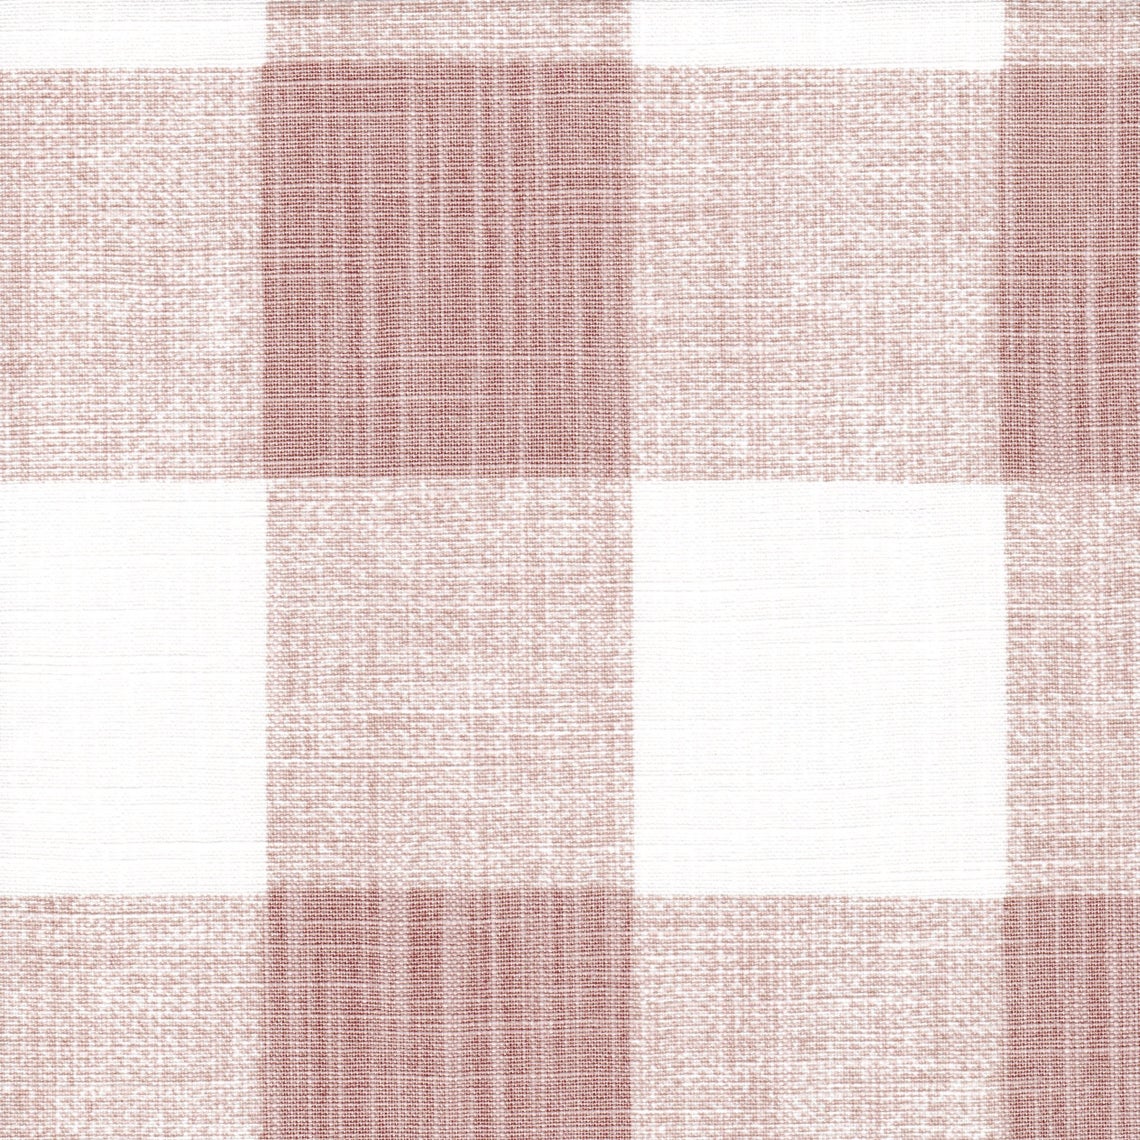 tie-up valance in anderson blush buffalo check plaid